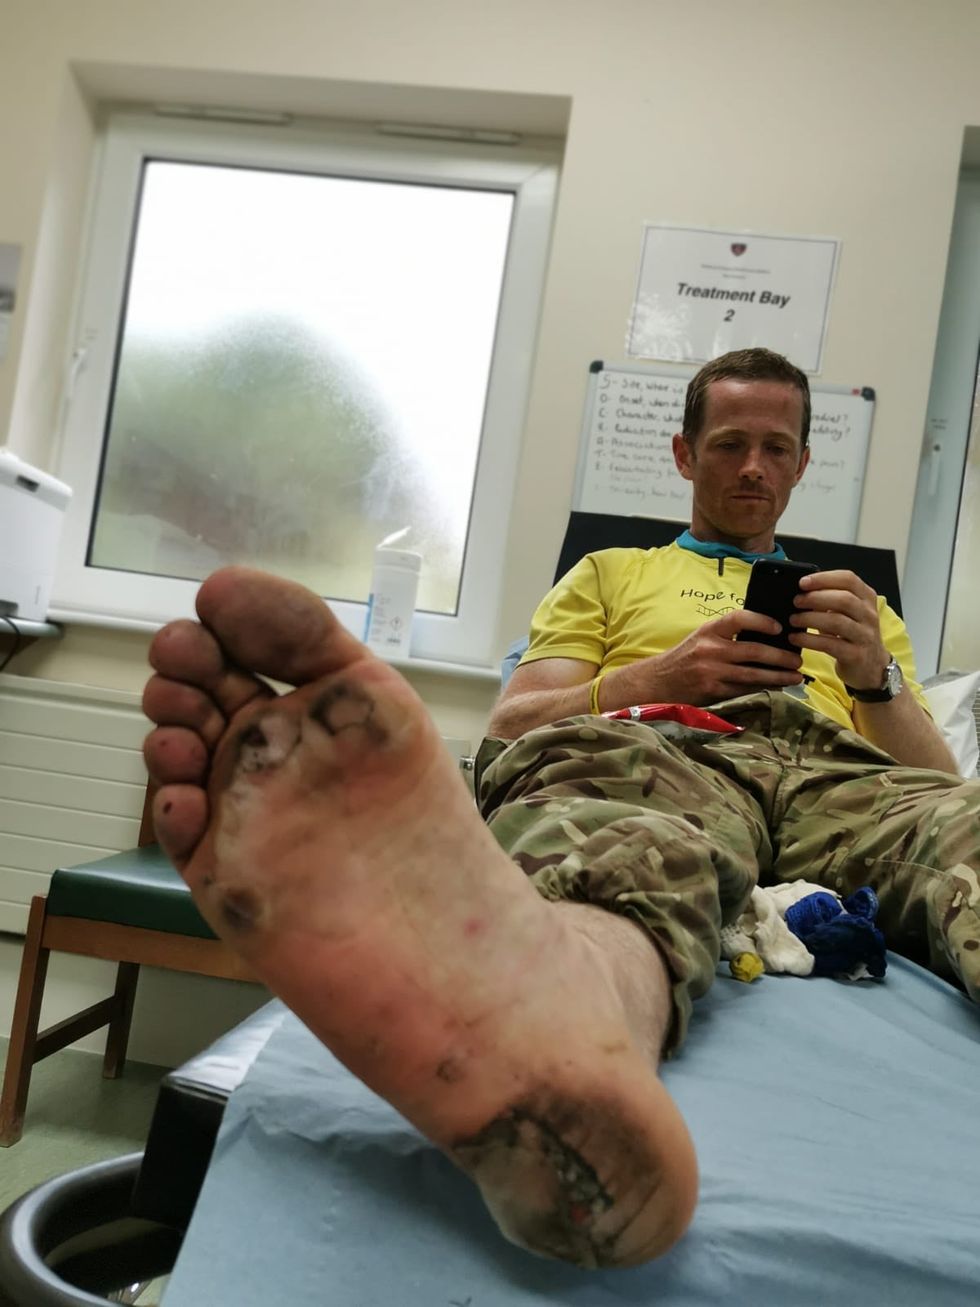 Major Chris Brannigan suffered blisters and infections during his previous barefoot trek (Chris Brannigan/PA)